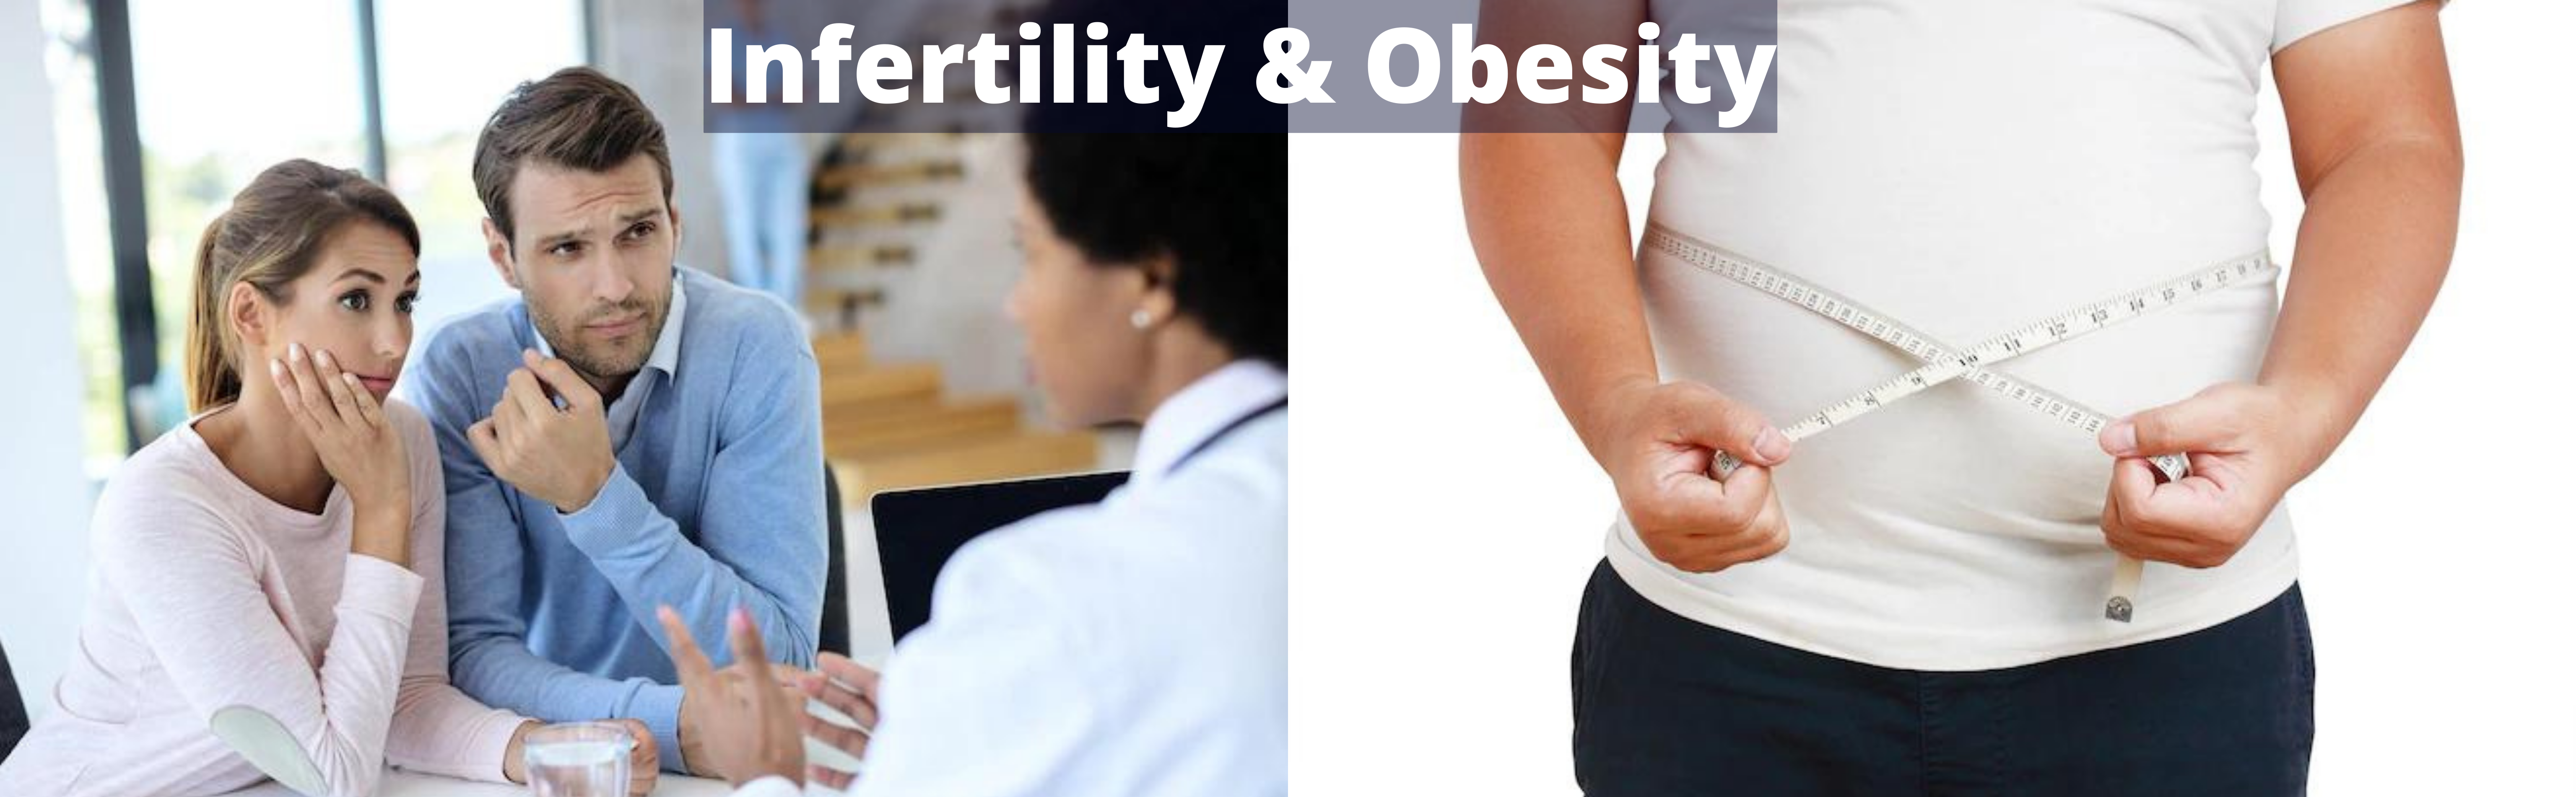 Obesity and infertility